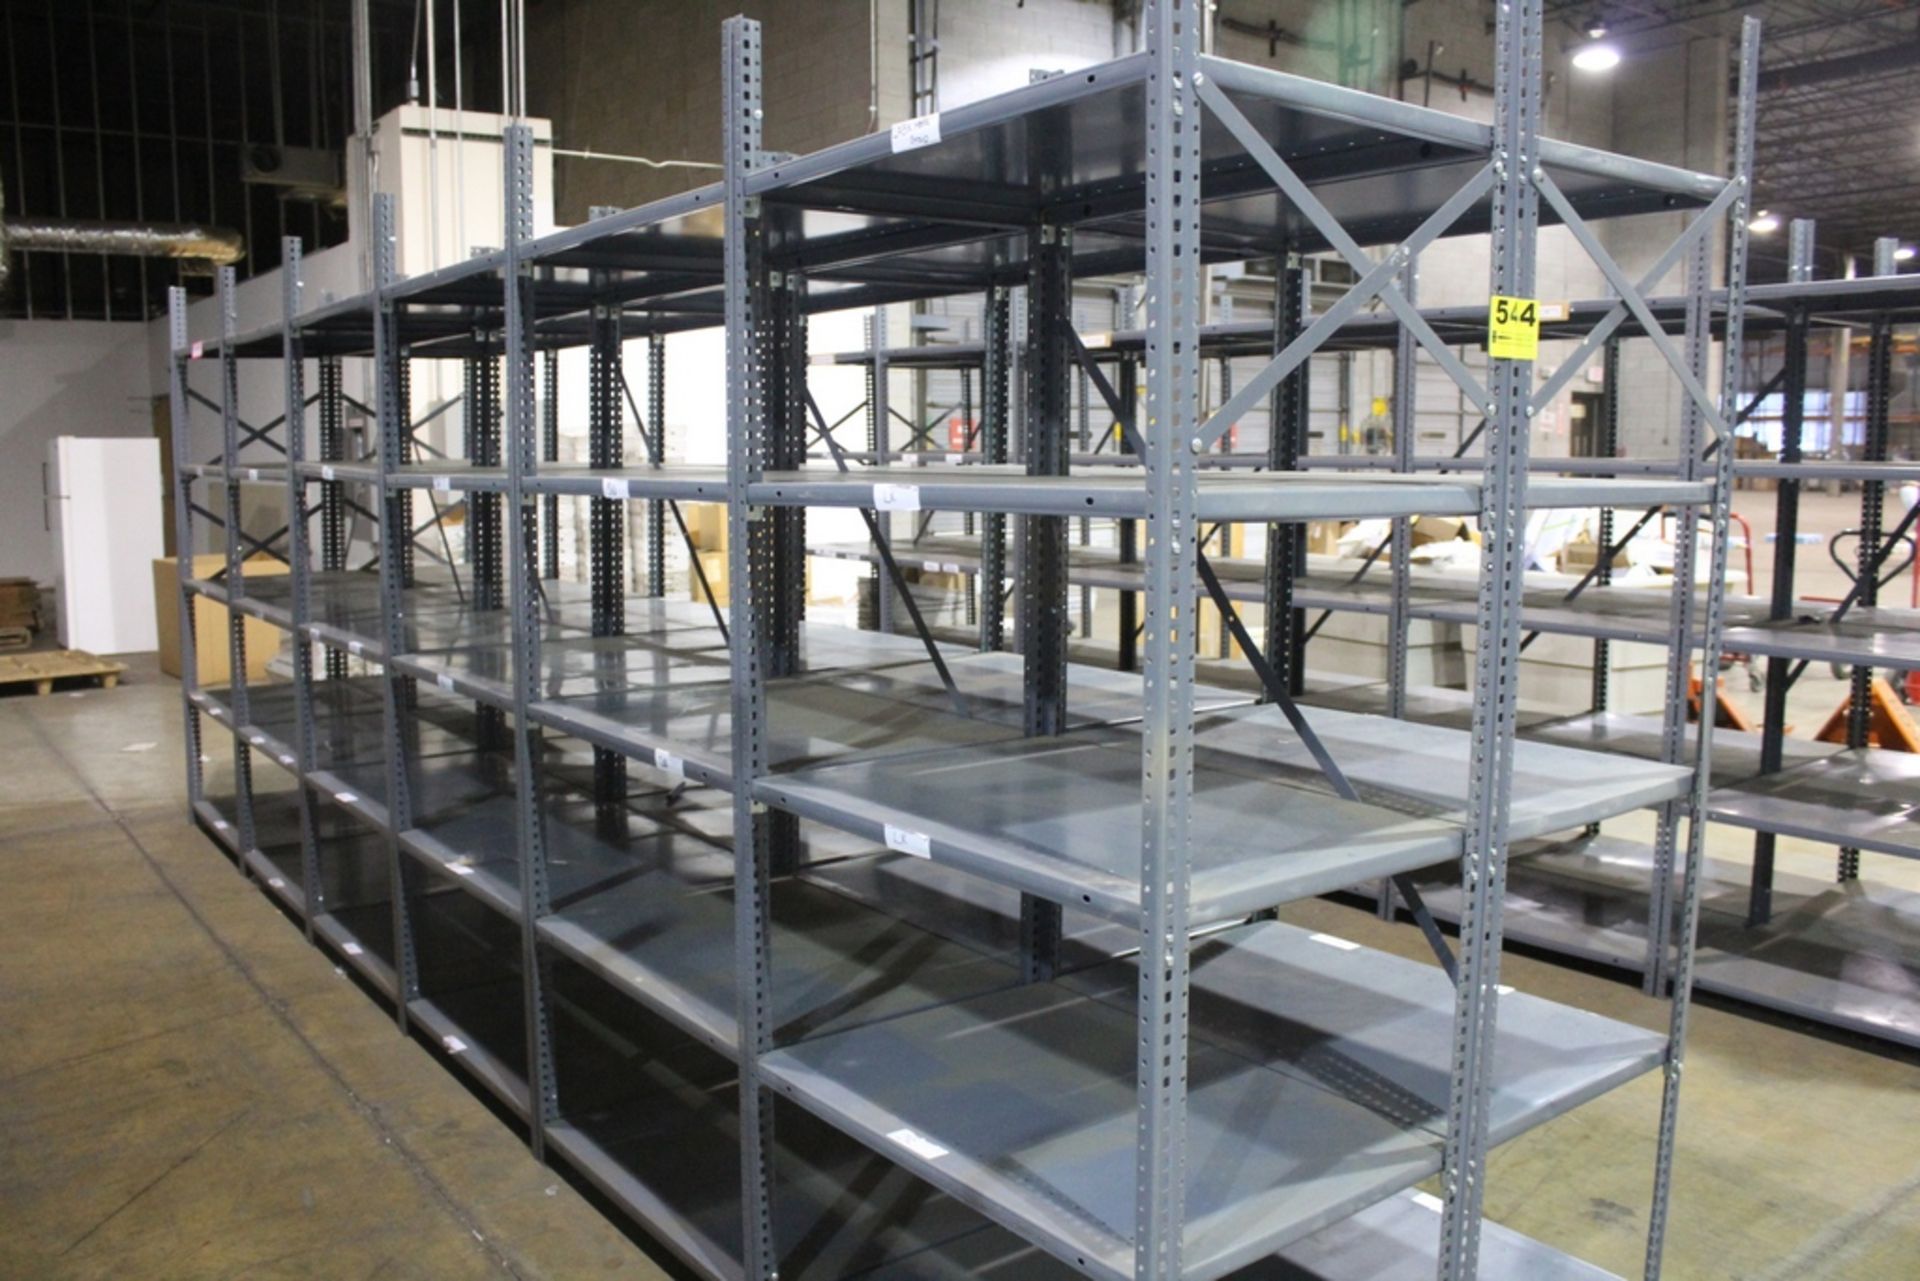 DOUBLE SIDED SHELVING UNIT, 18' X 2' X 85" PER SIDE